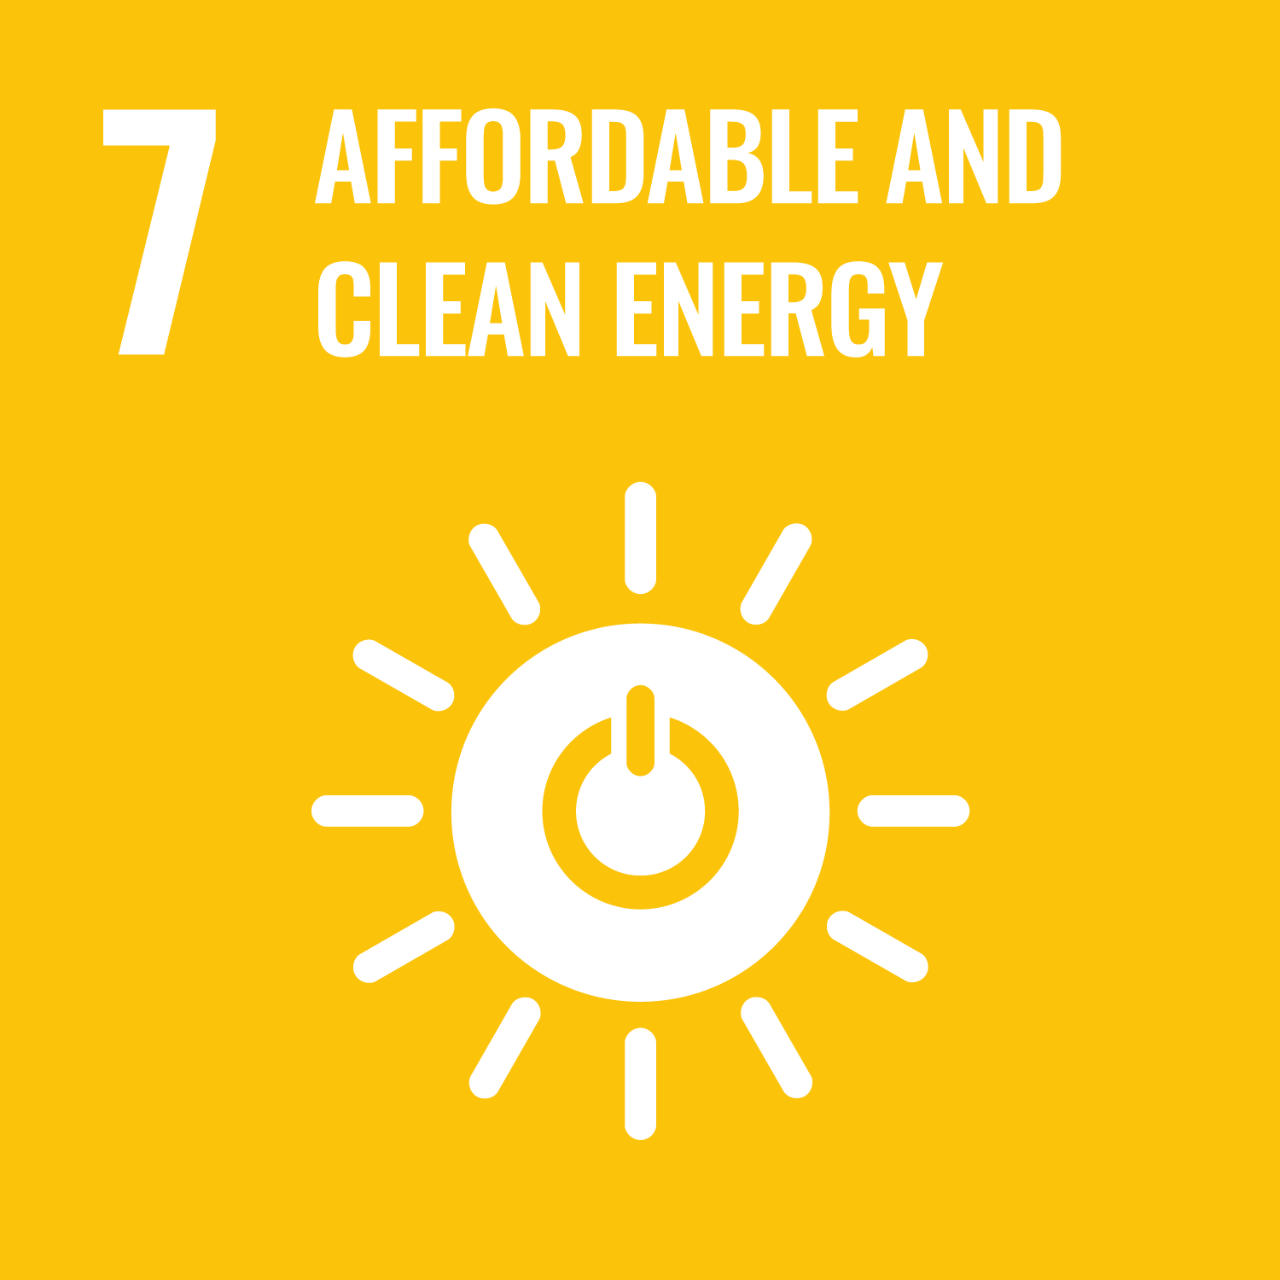 Yellow icon with graphic of sun and power symbol to represent UNSDG Goal 7: Affordable and Clean Energy.